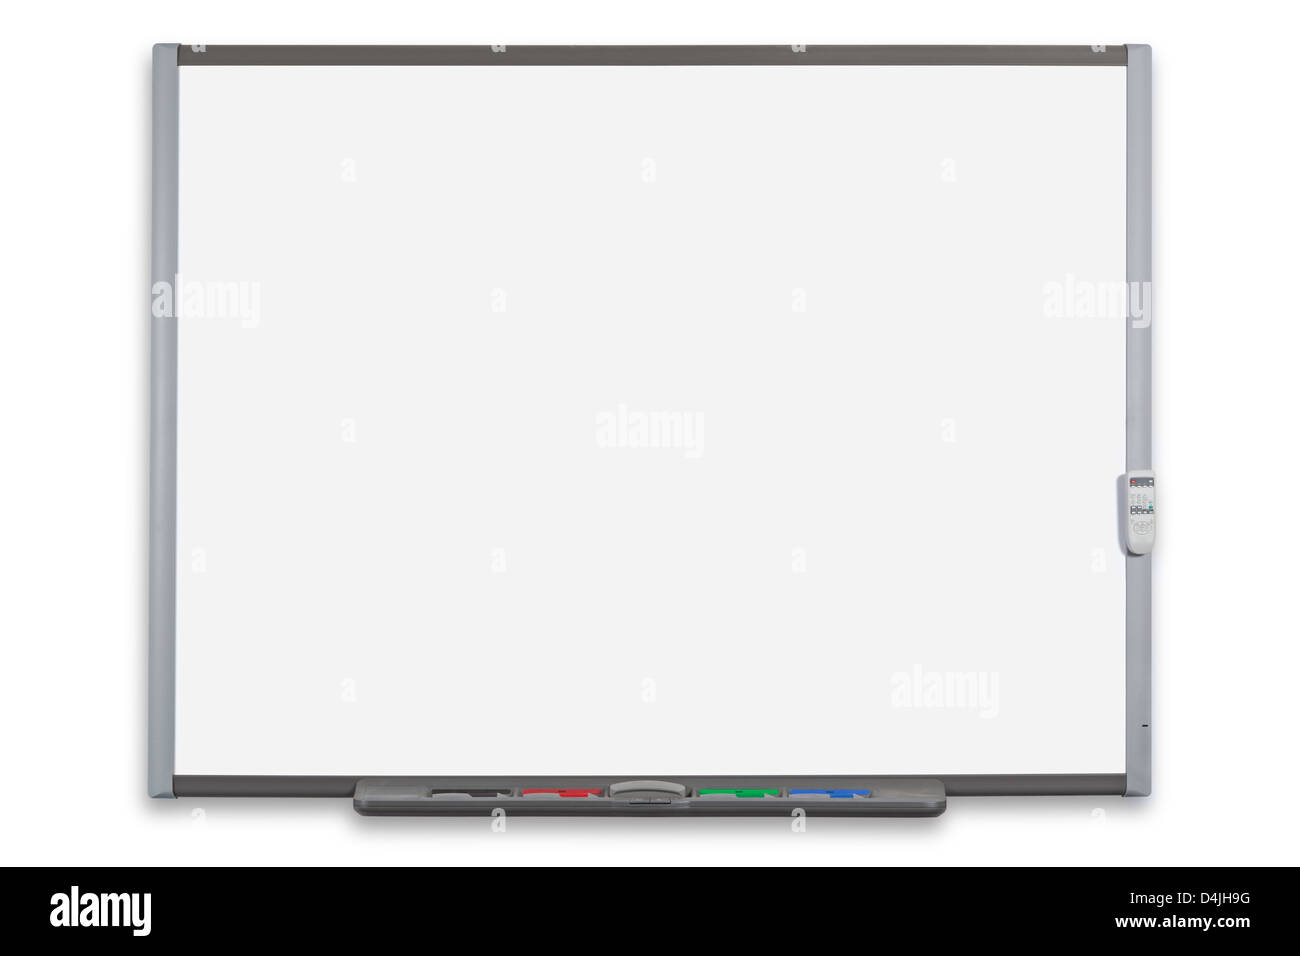 School interactive whiteboard or IWB with remote control, isolated on a white background. Stock Photo